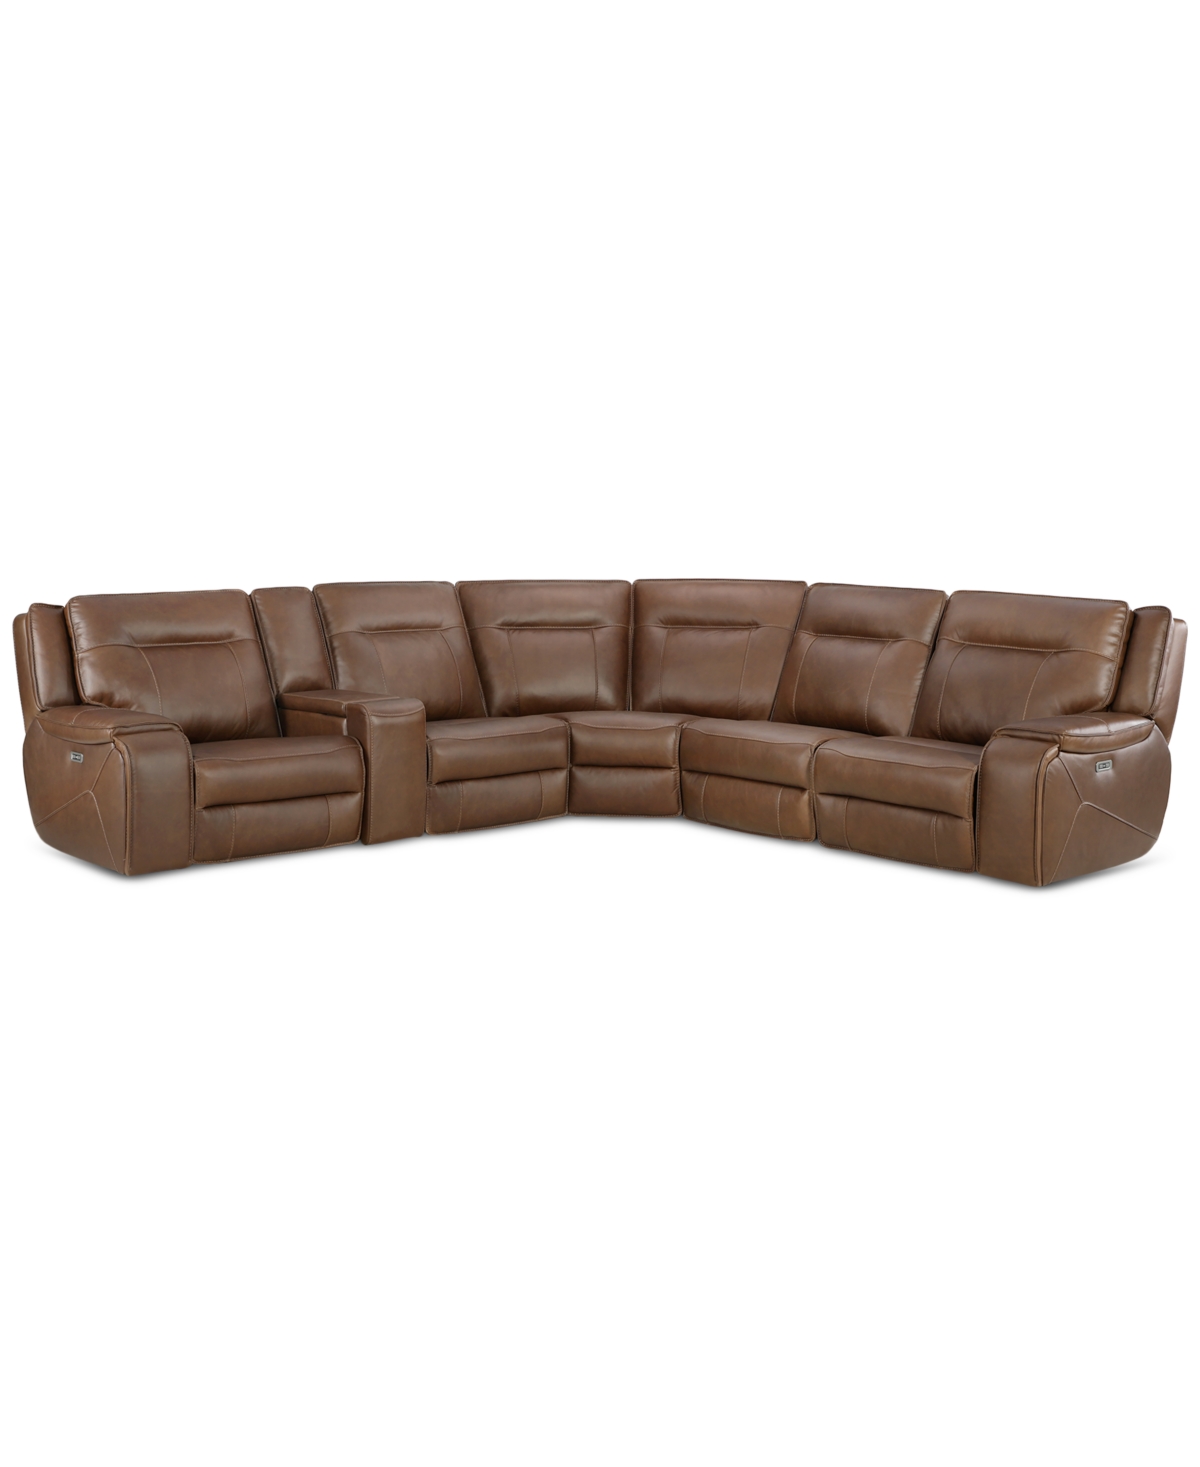 Macy's Hansley 6-pc Zero Gravity Leather Sectional With 2 Power Recliners, Created For  In Brown